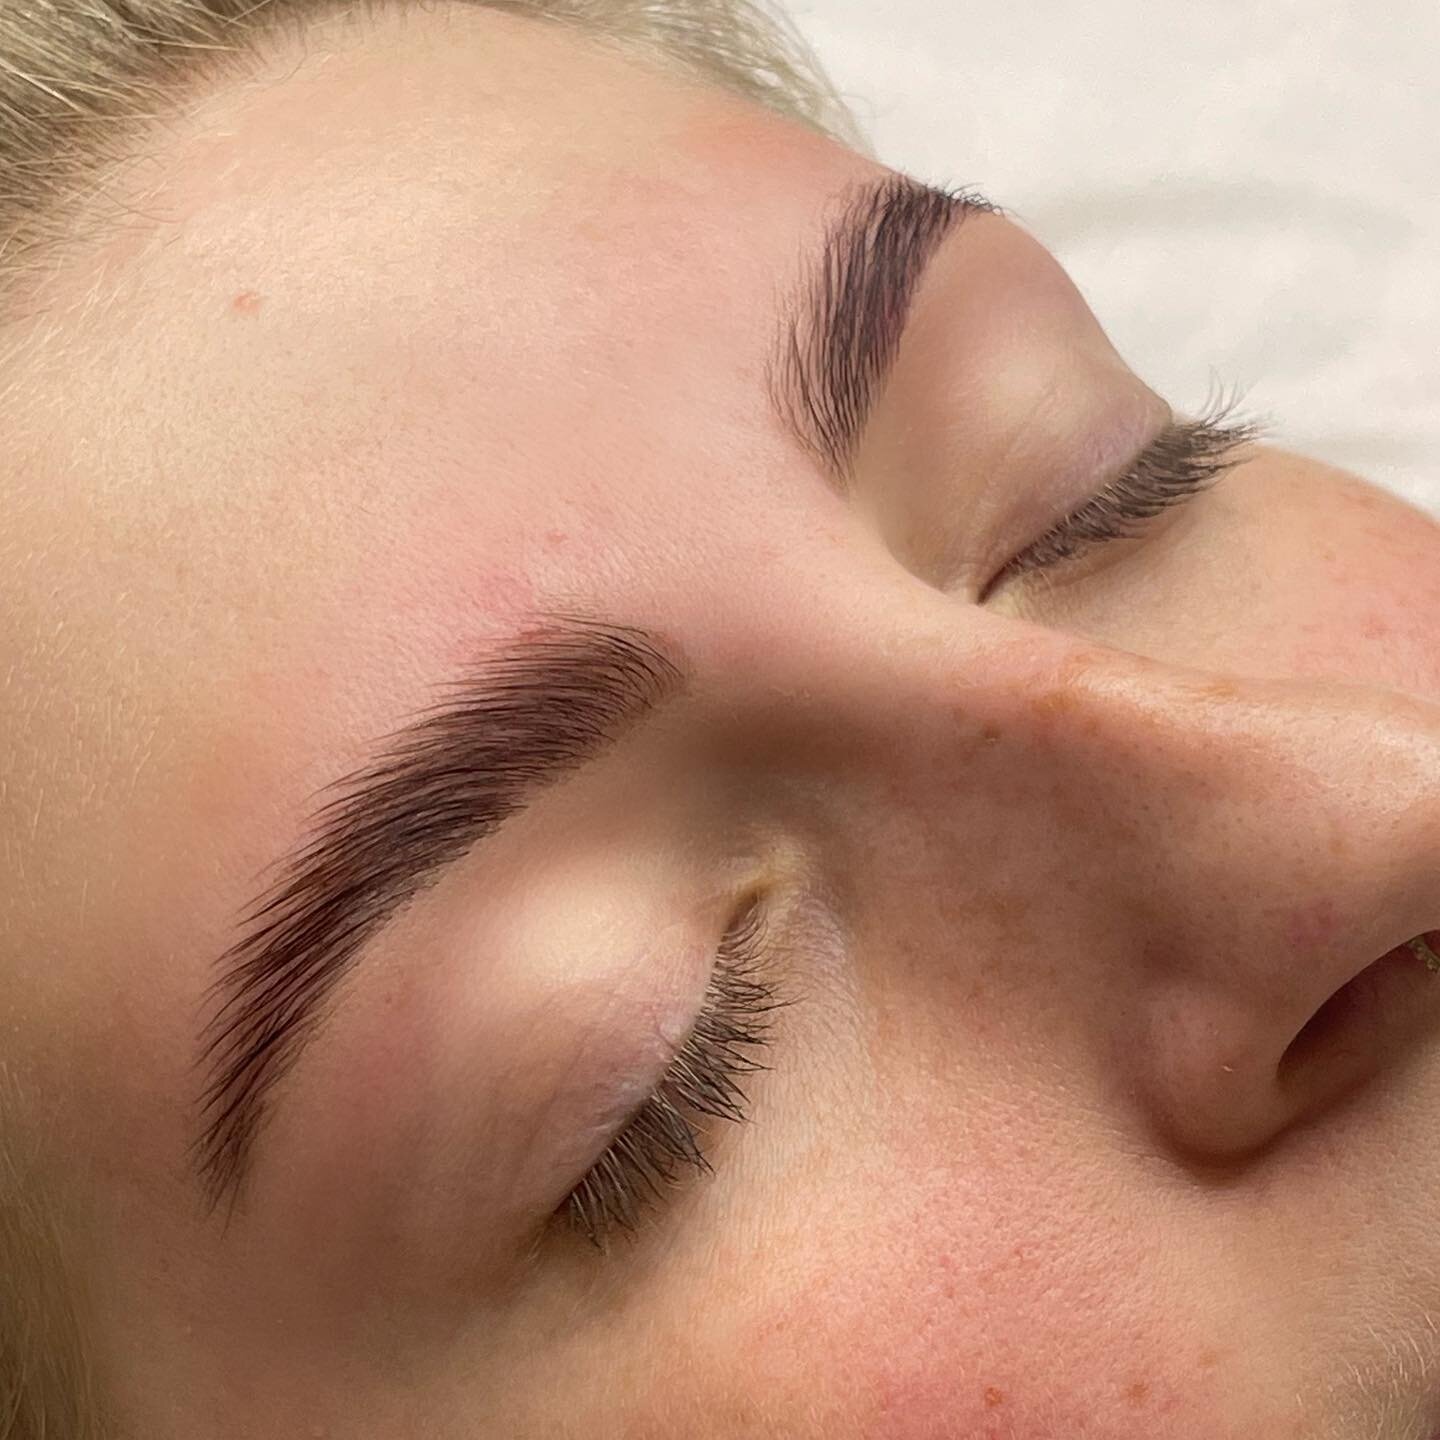 Enhance your brows with our Brow Lamination and Hybrid Brow Dye for stunning results! 💁&zwj;♀️✨ Our $95 package includes professional waxing to shape your brows perfectly. Say goodbye to unruly brows and hello to flawless arches! Book your appointme